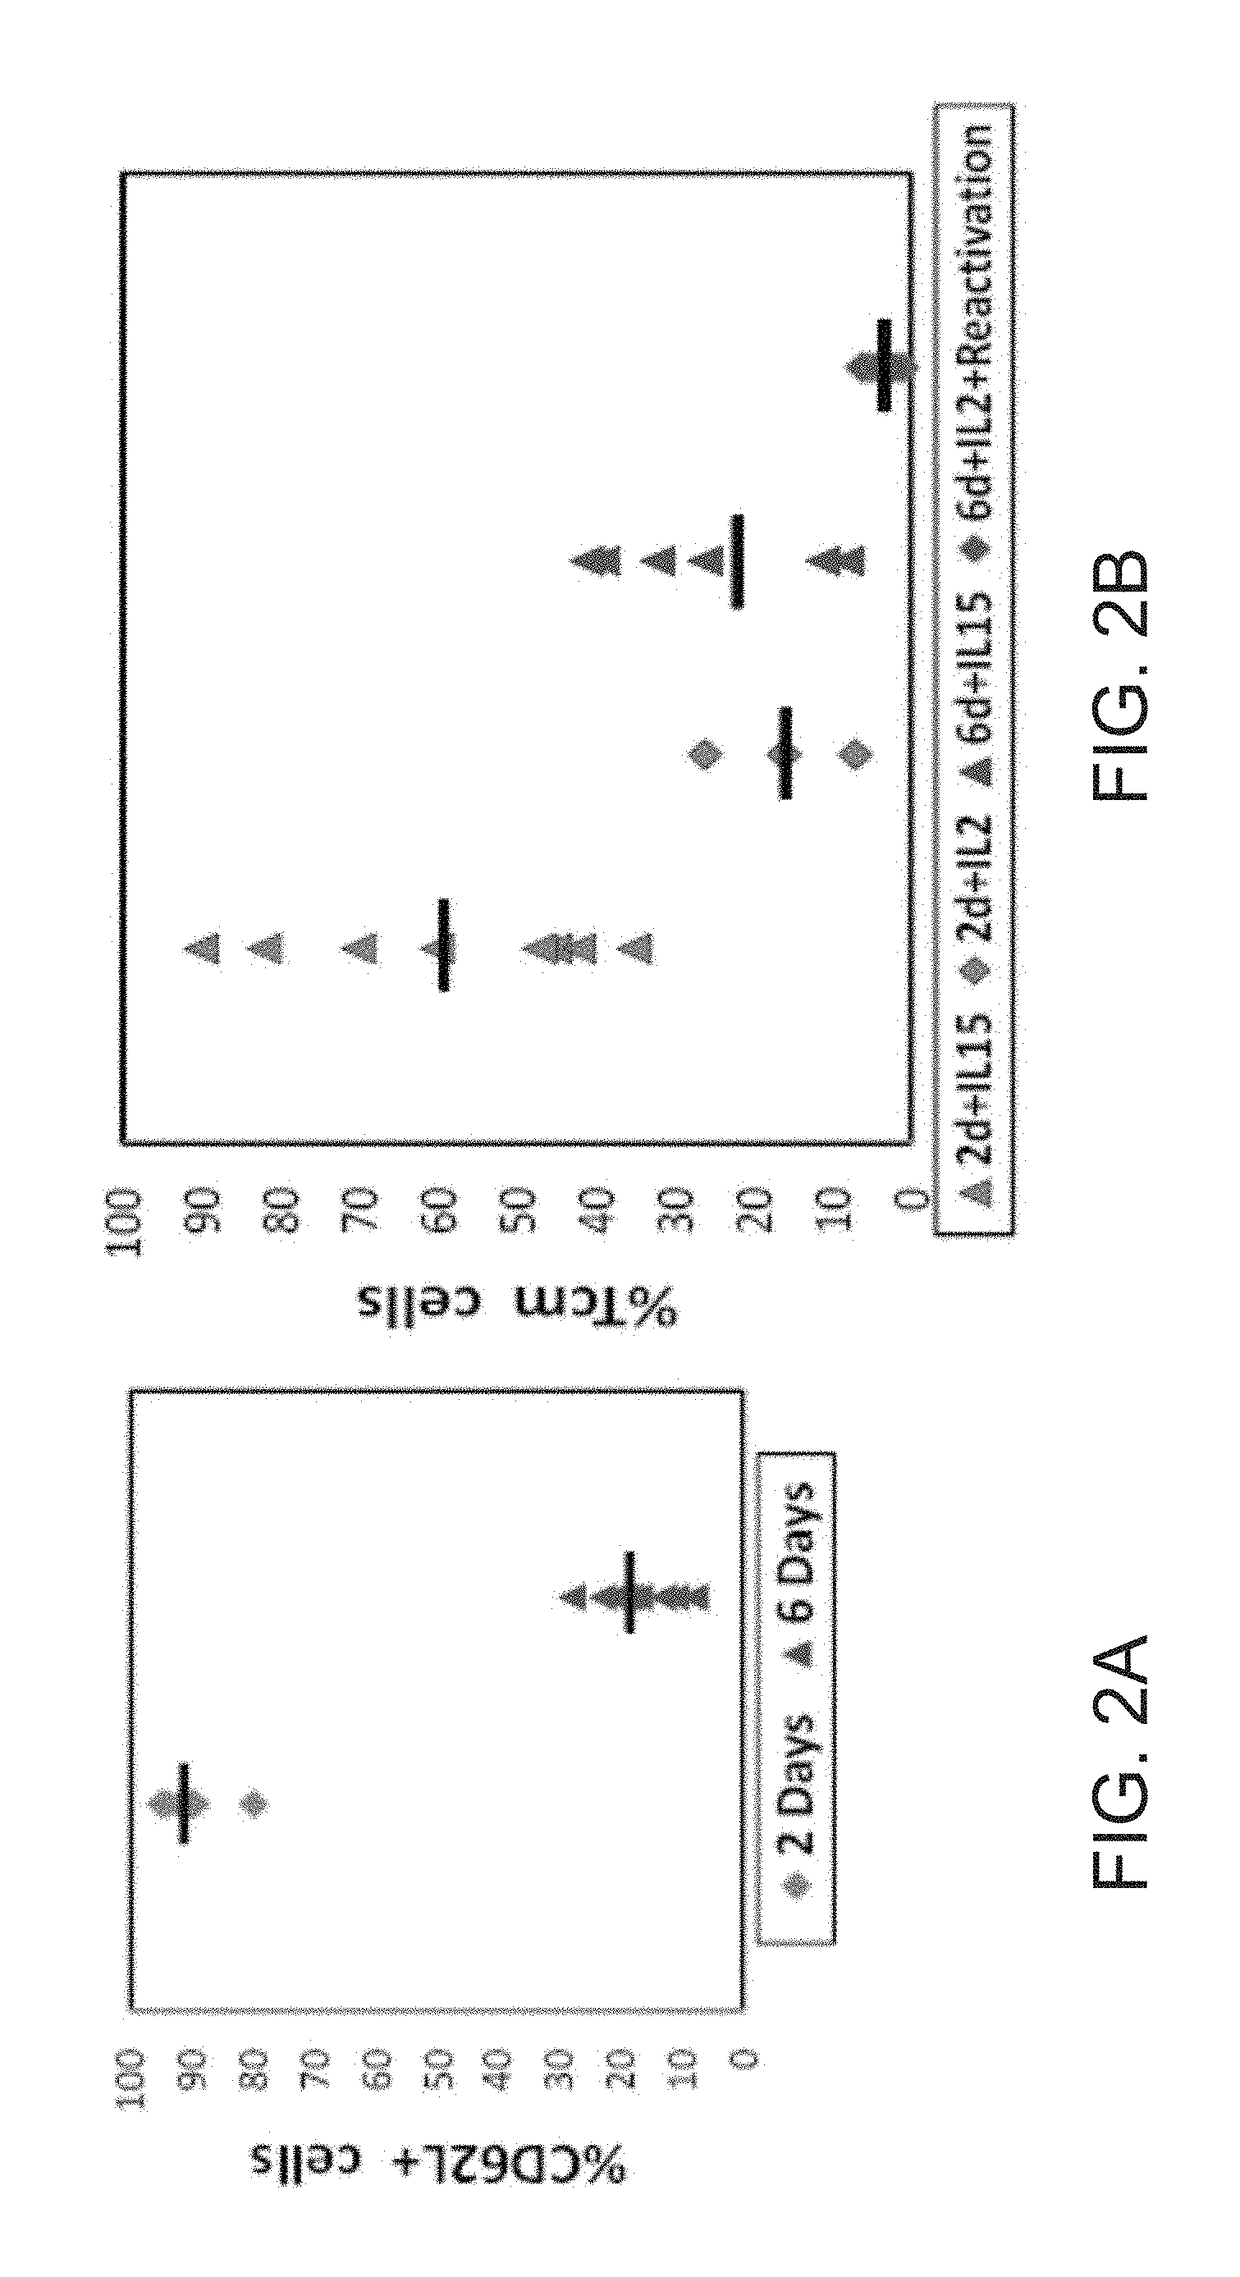 Anti third party central memory T cells, methods of producing same and use of same in transplantation and disease treatment